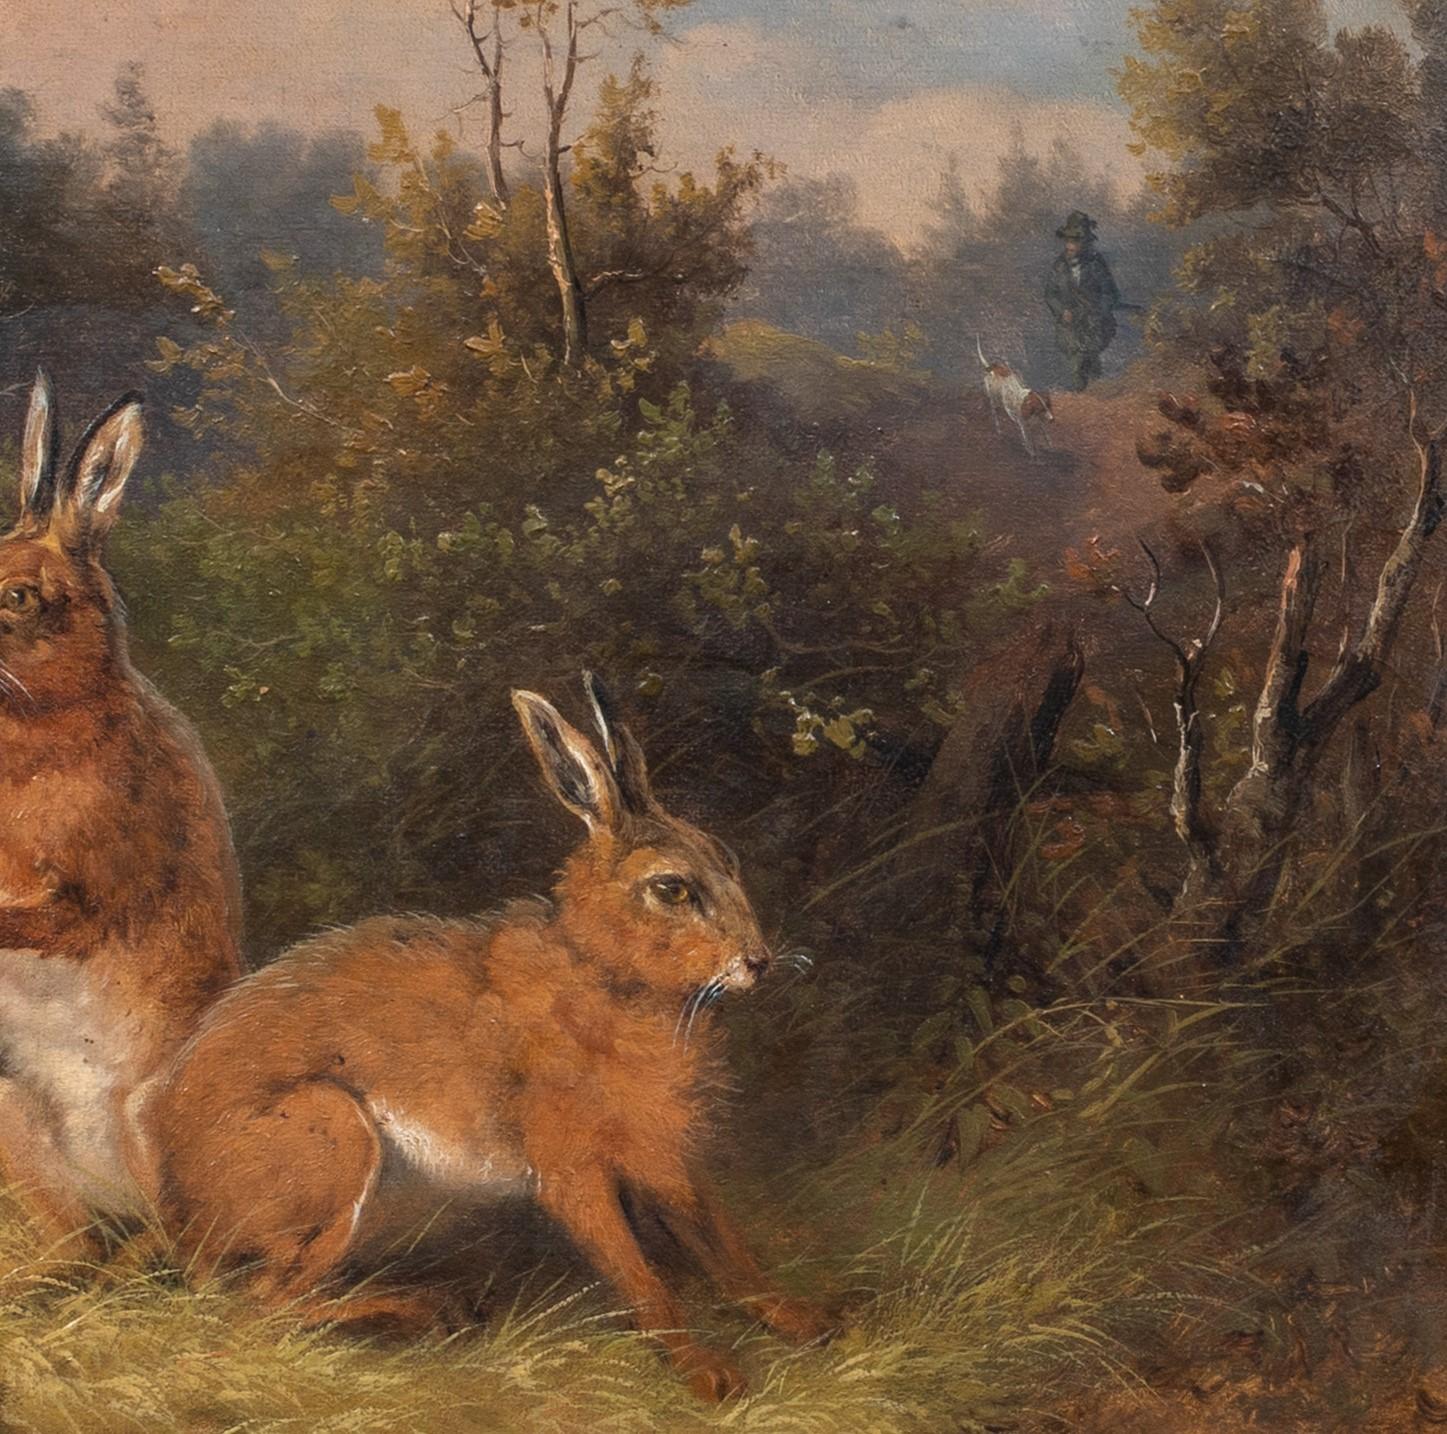 Study Of Wild Hares, 19th Century

by William Melchior (1817-1860)

19th century English study of a pair of wild hares hiding with a huntsman in the distance, oil on canvas by William Melchoir. Excellent quality and condition wildlife / sporting